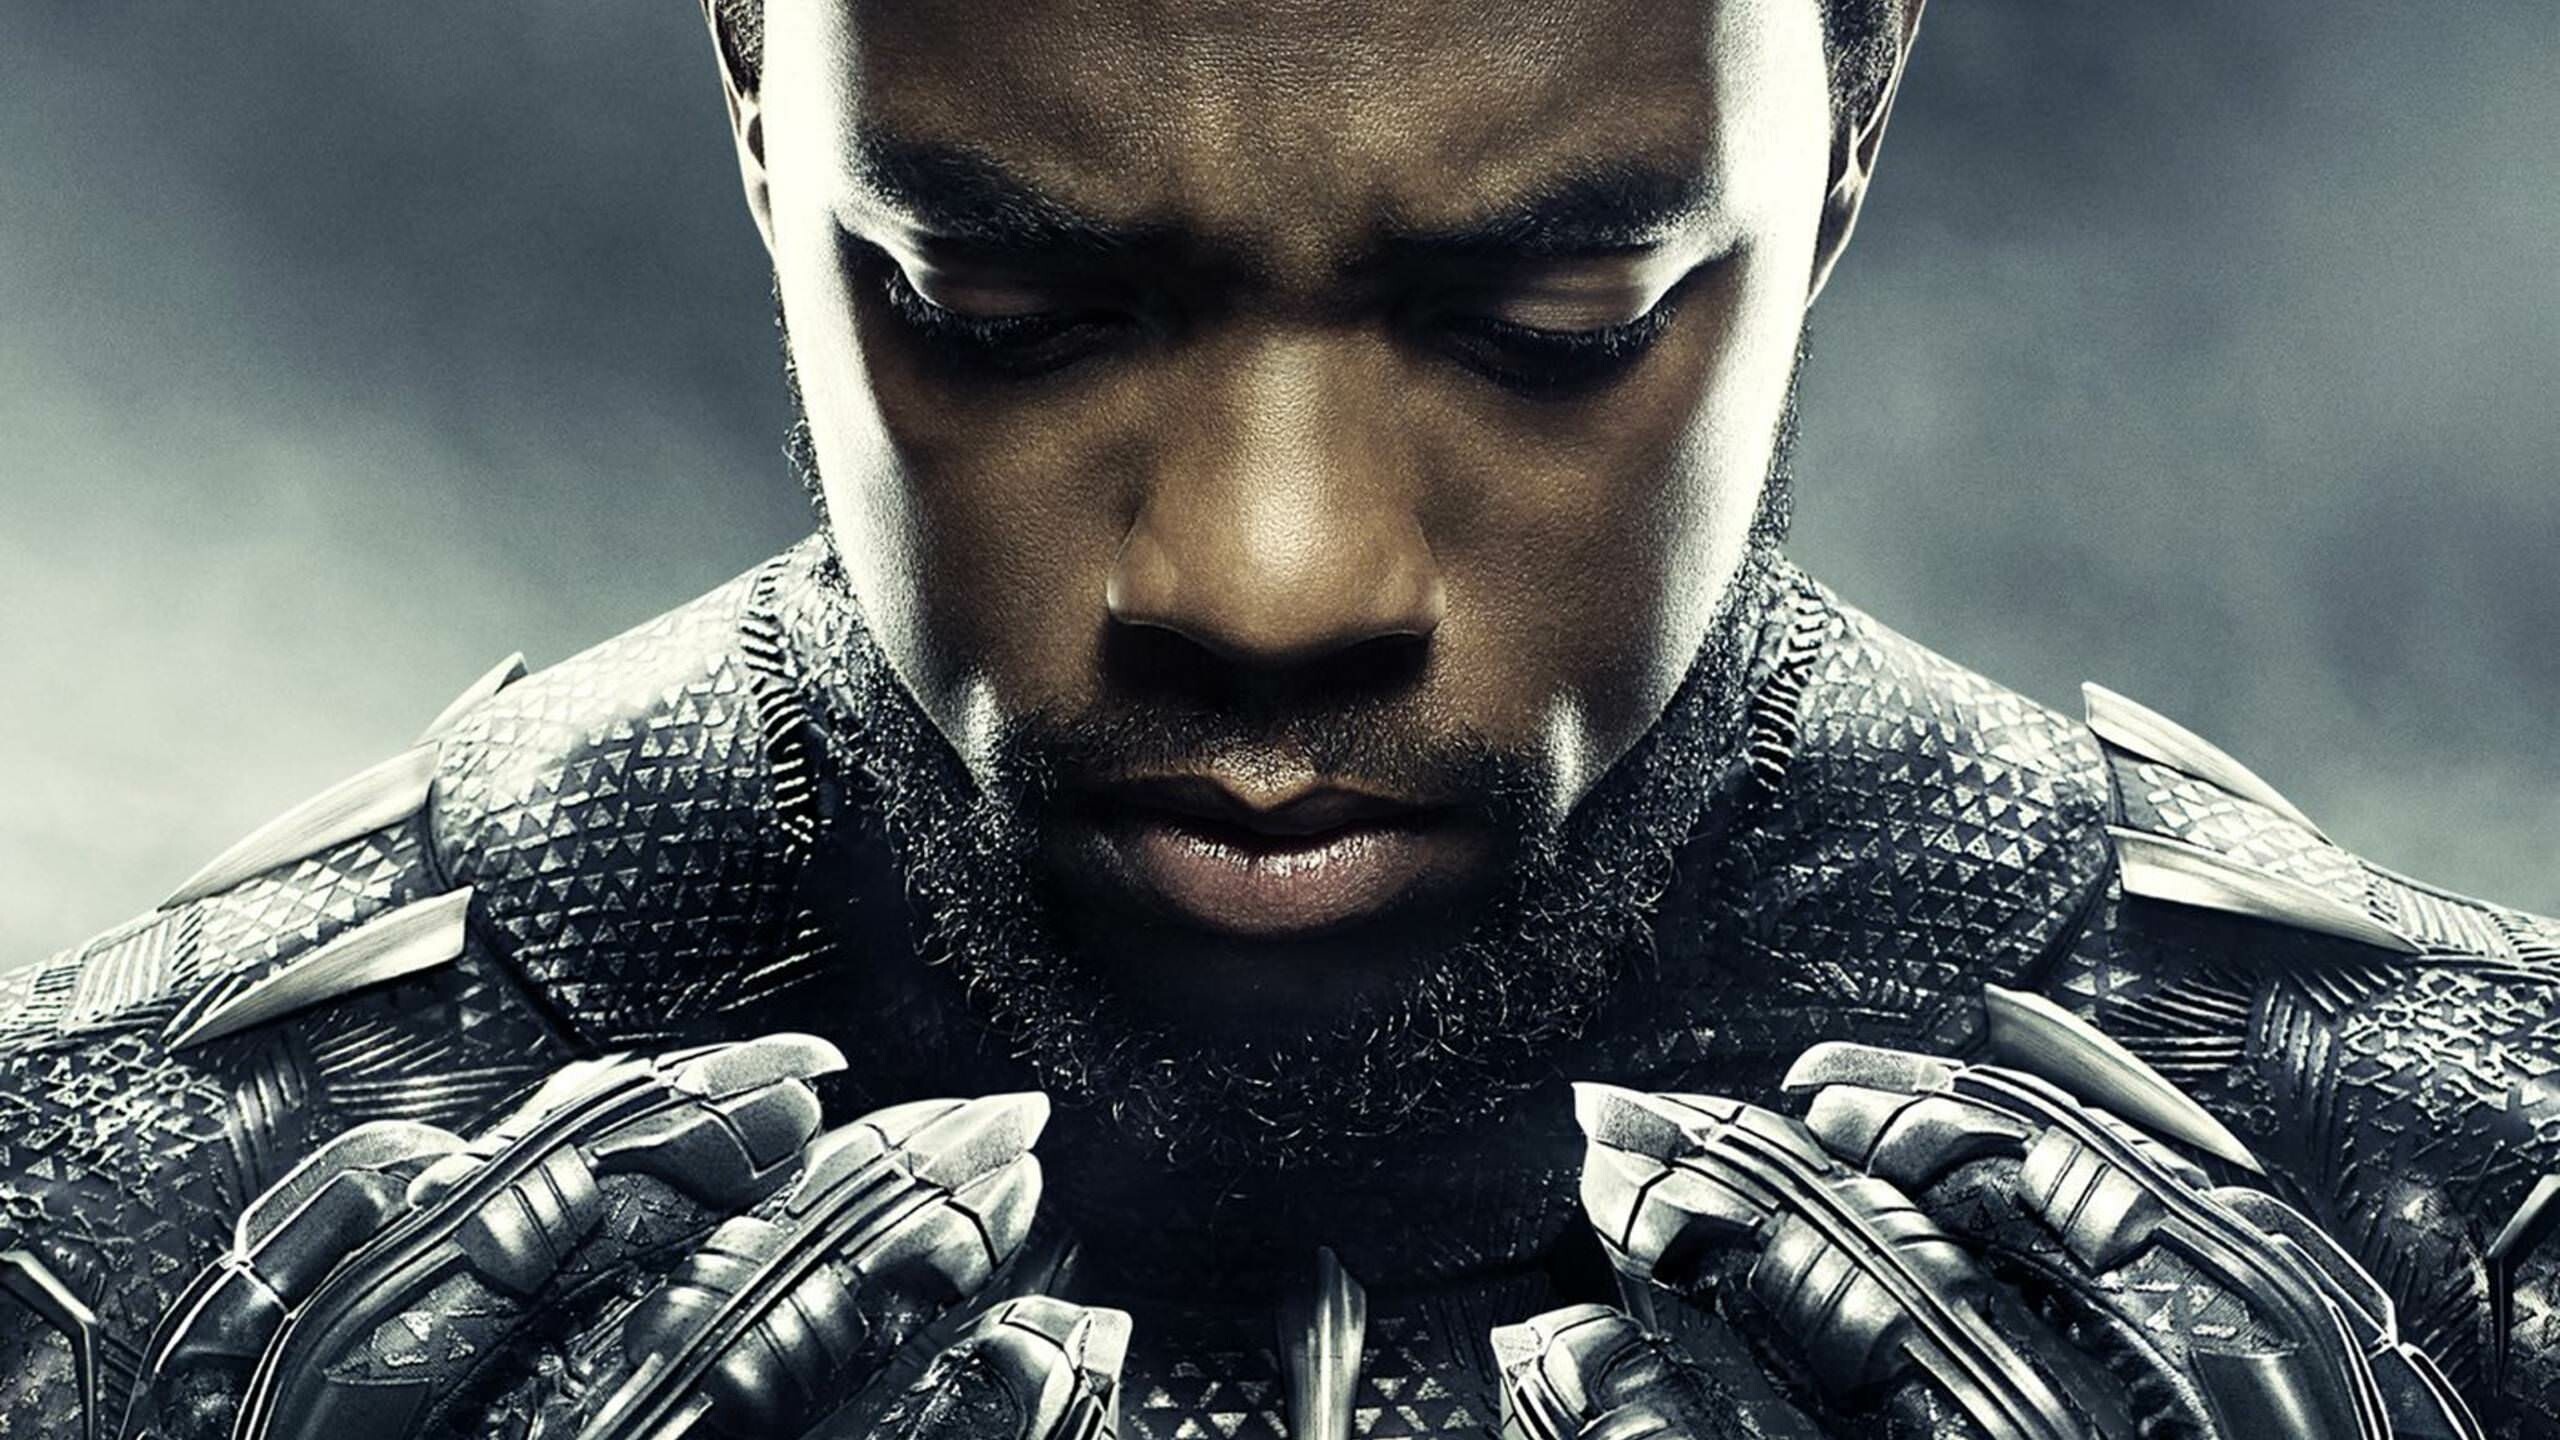 Black Panther movie wallpapers, HD 4K 5K, PC and mobile, Images, 2560x1440 HD Desktop